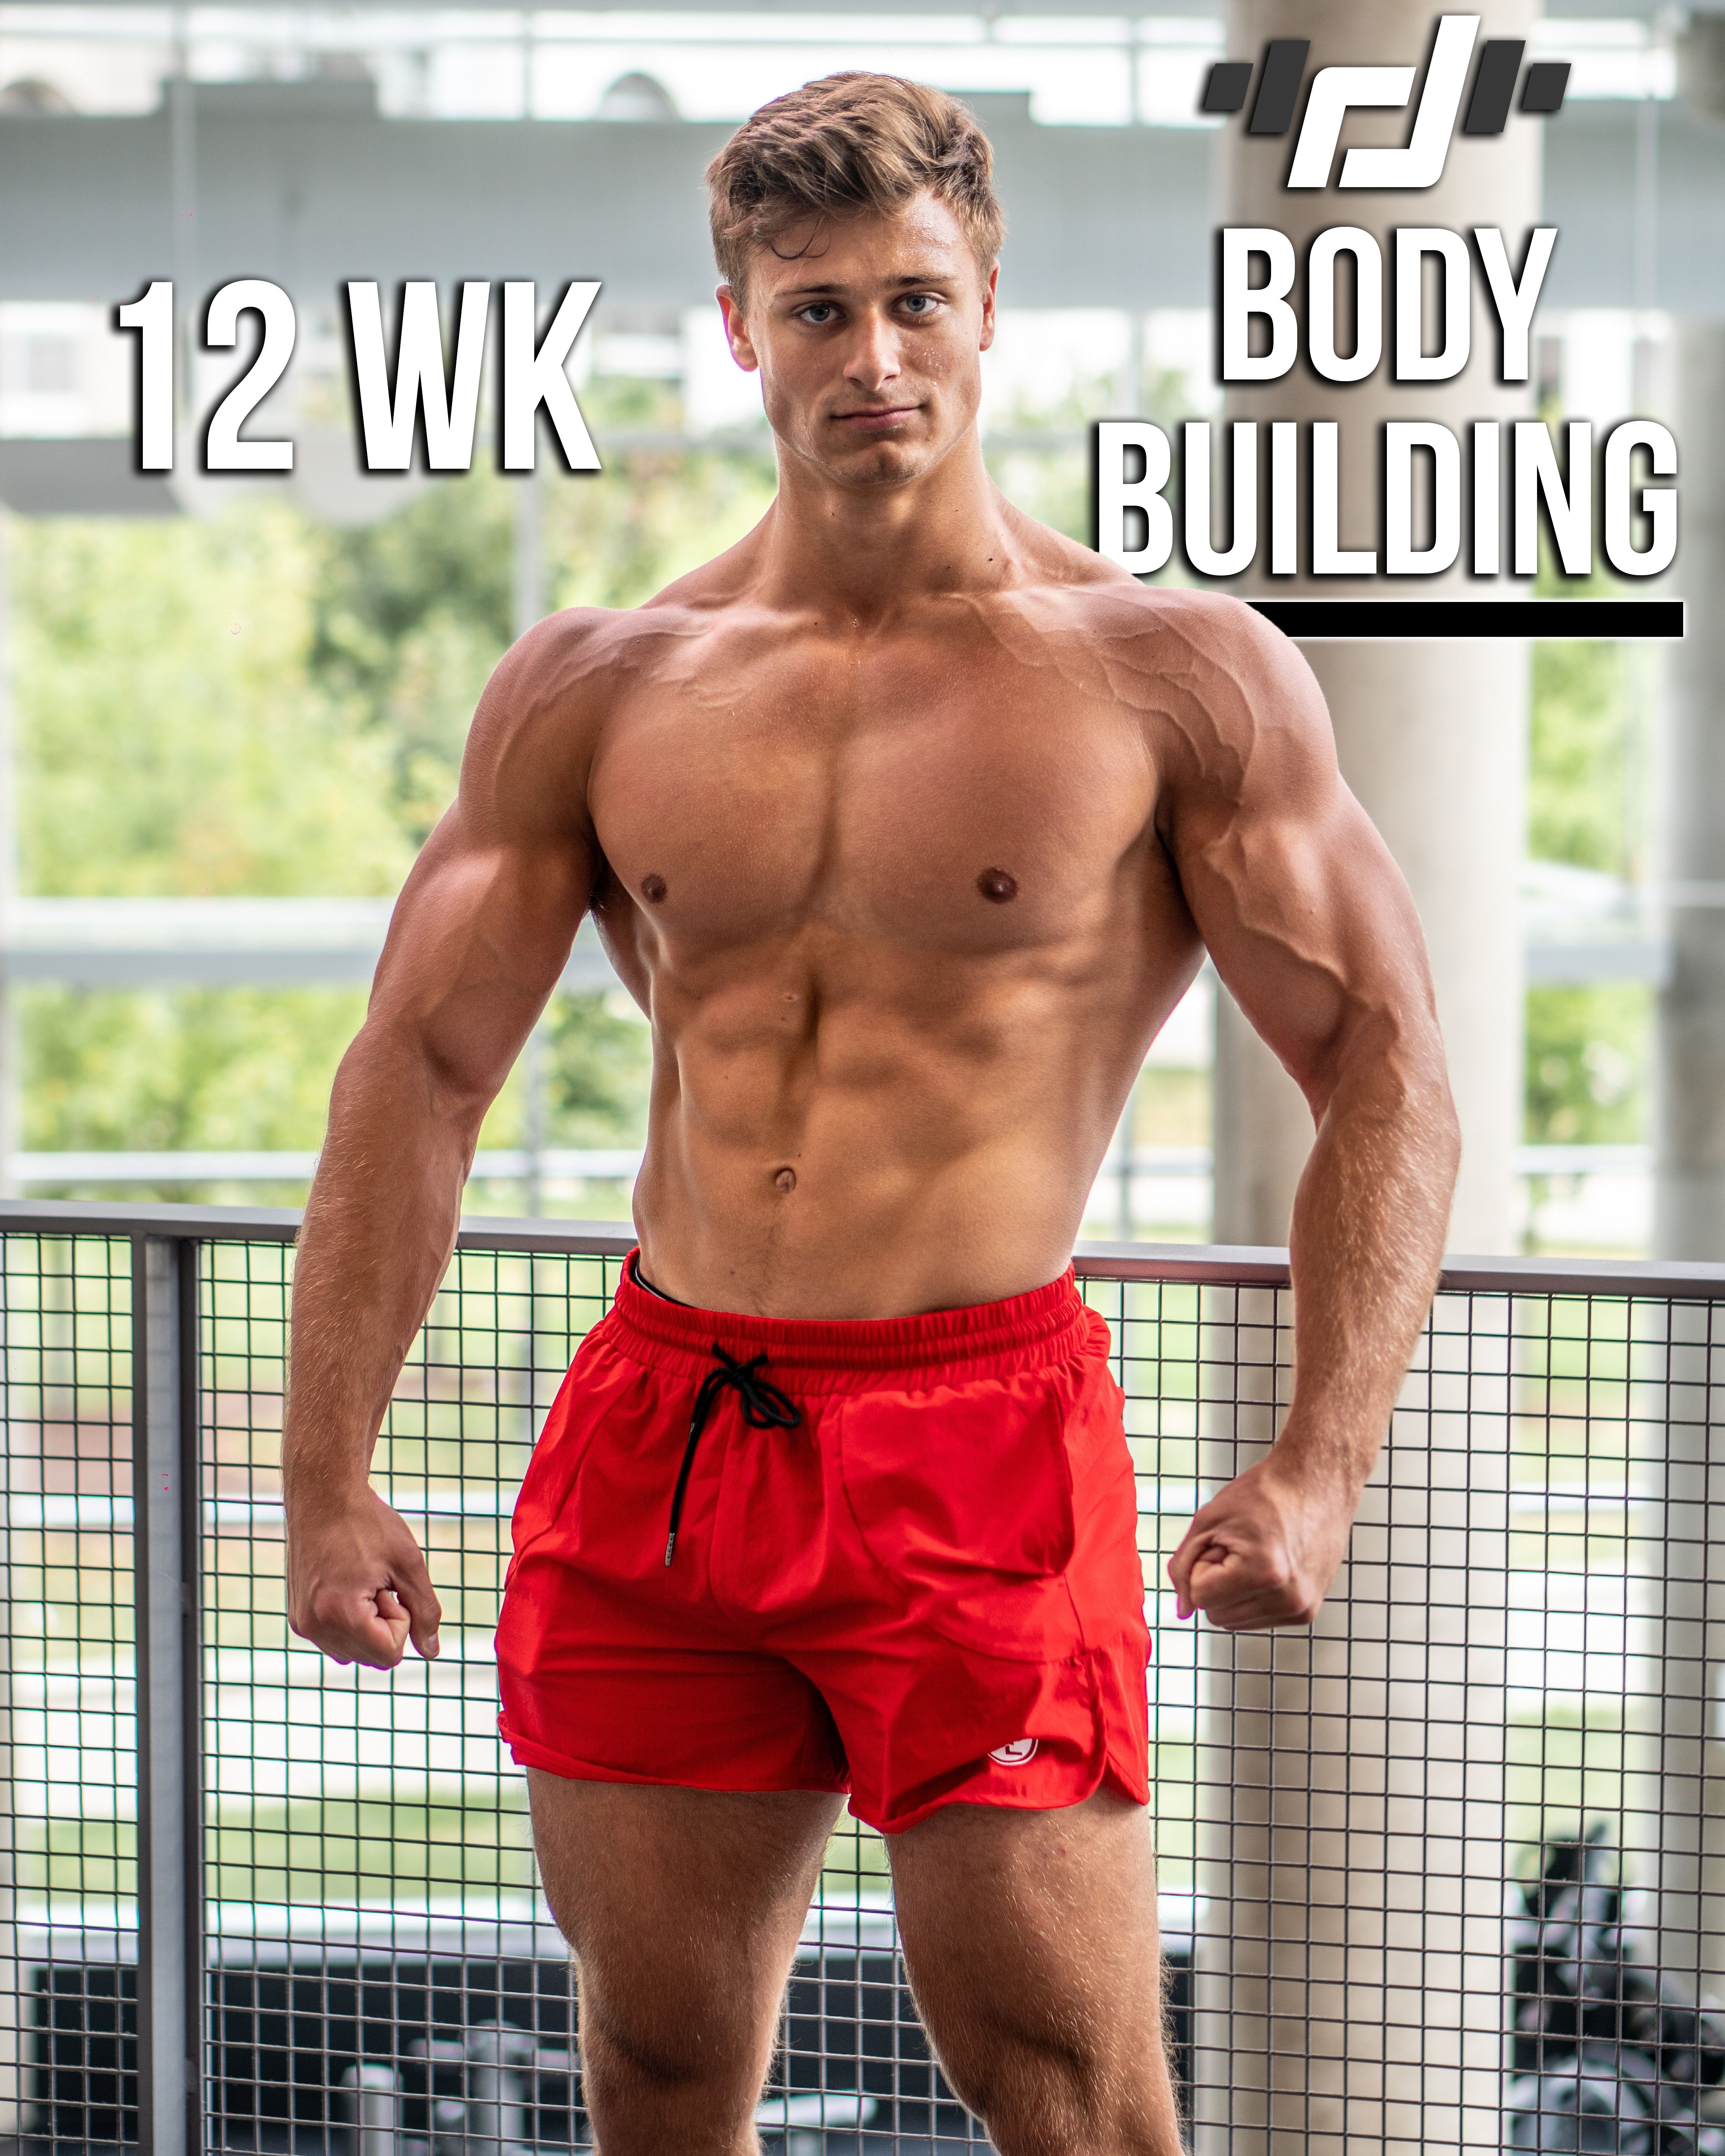 company that third party tests bodybulding supplements: The Easy Way